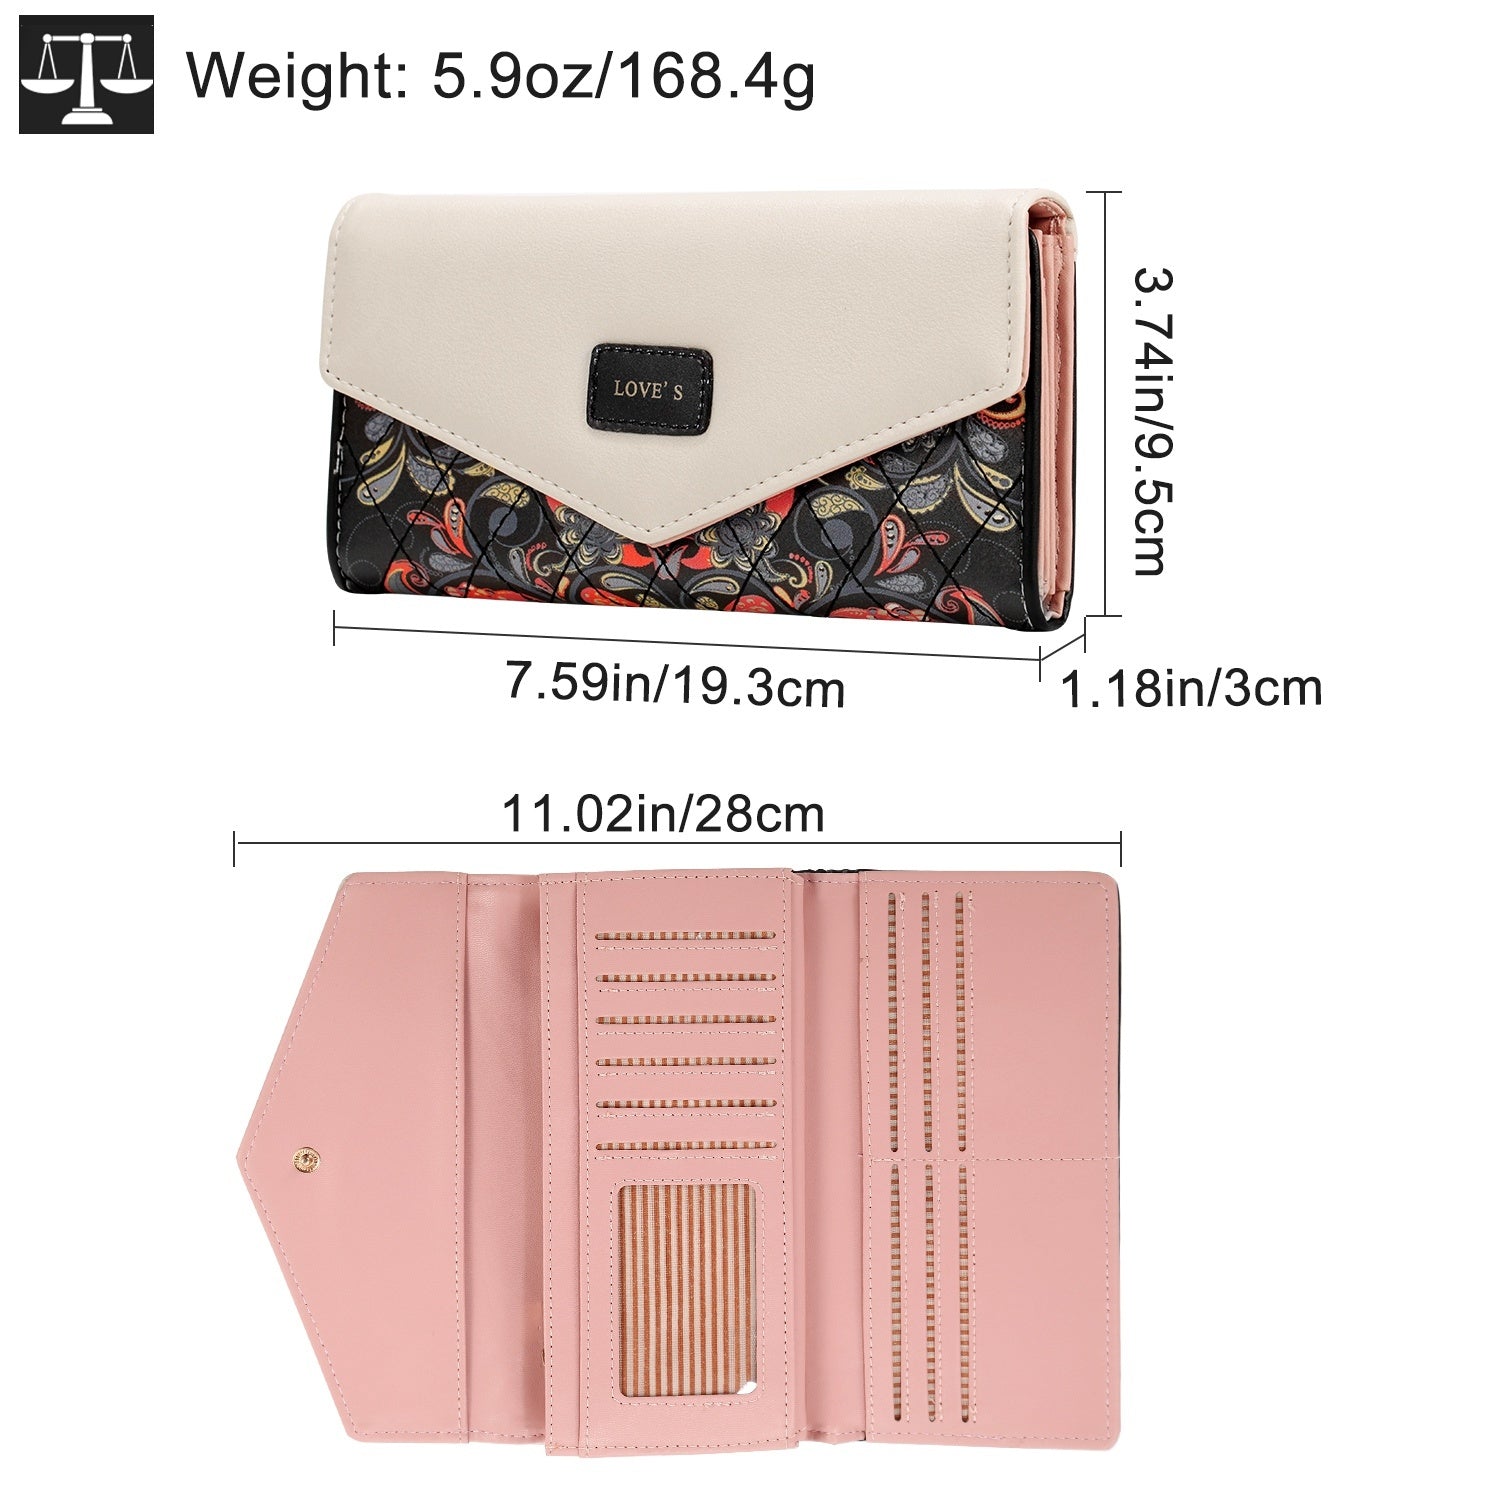 Women Wallet Soft Leather Trifold Clutch Purse Lady Long Purse Credit Card Holder Organizer Phone Pouch with Zipper Pocket